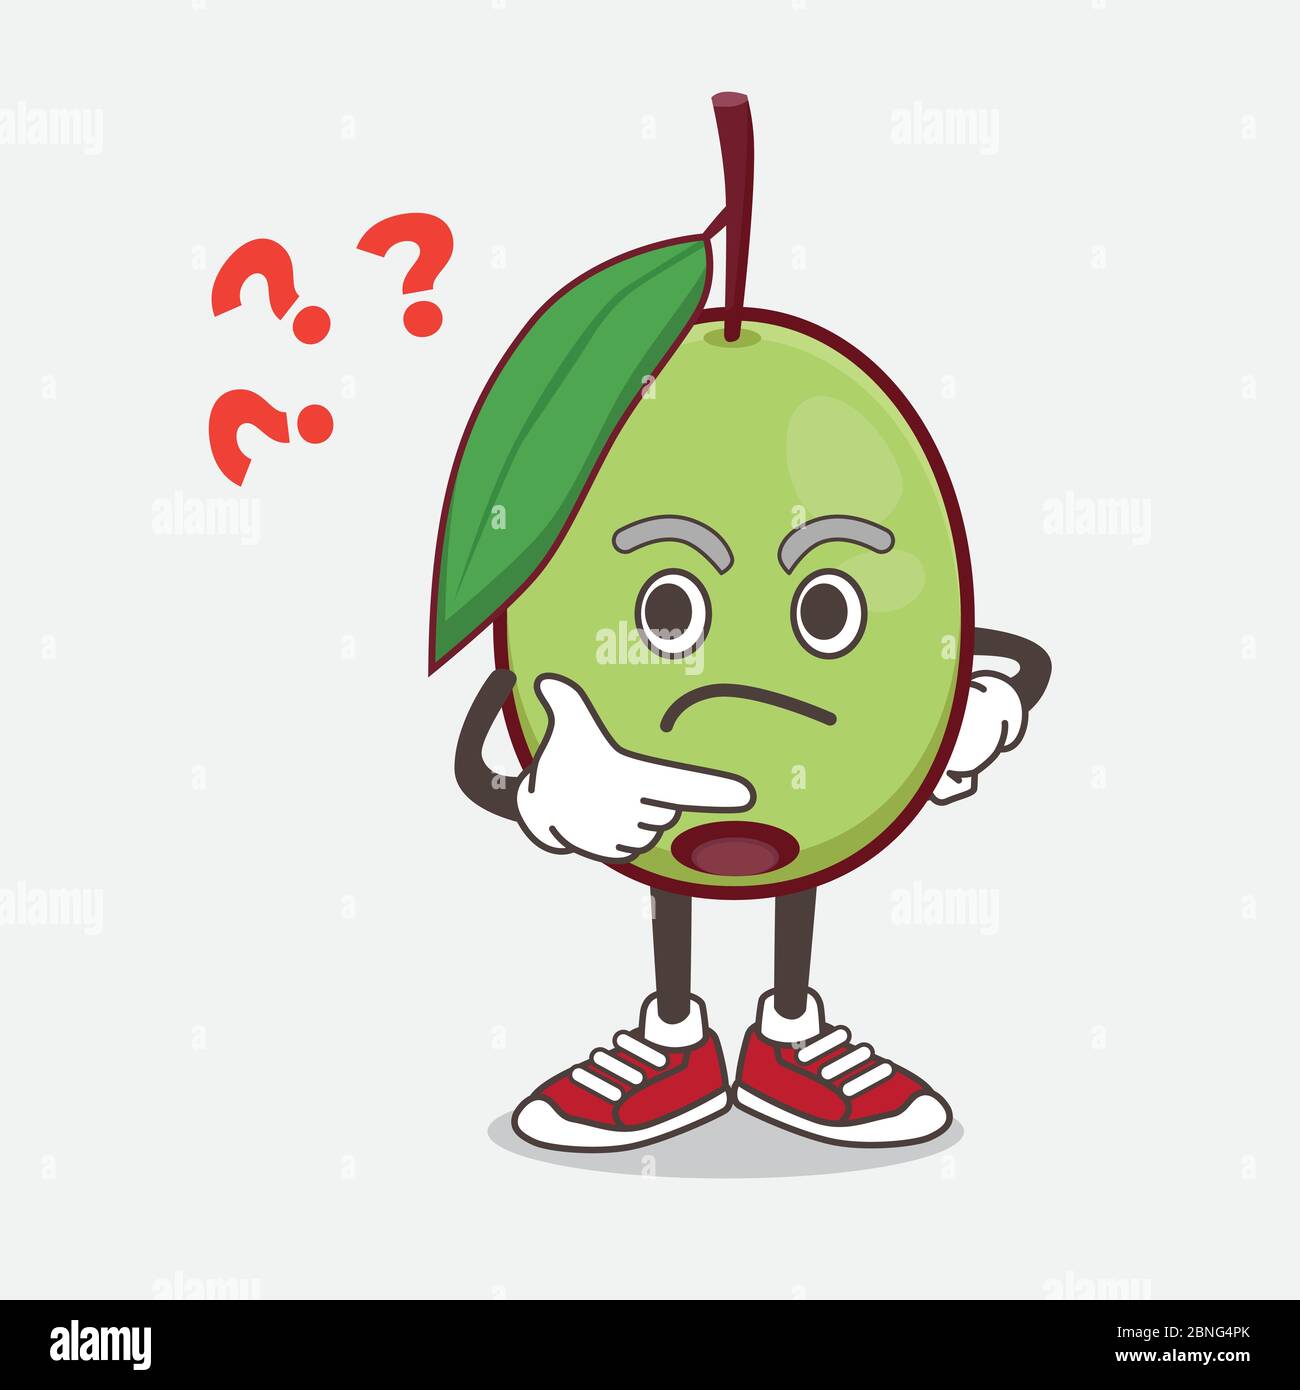 an-illustration-of-olive-fruit-cartoon-mascot-character-in-a-confused-gesture-2BNG4PK.jpg